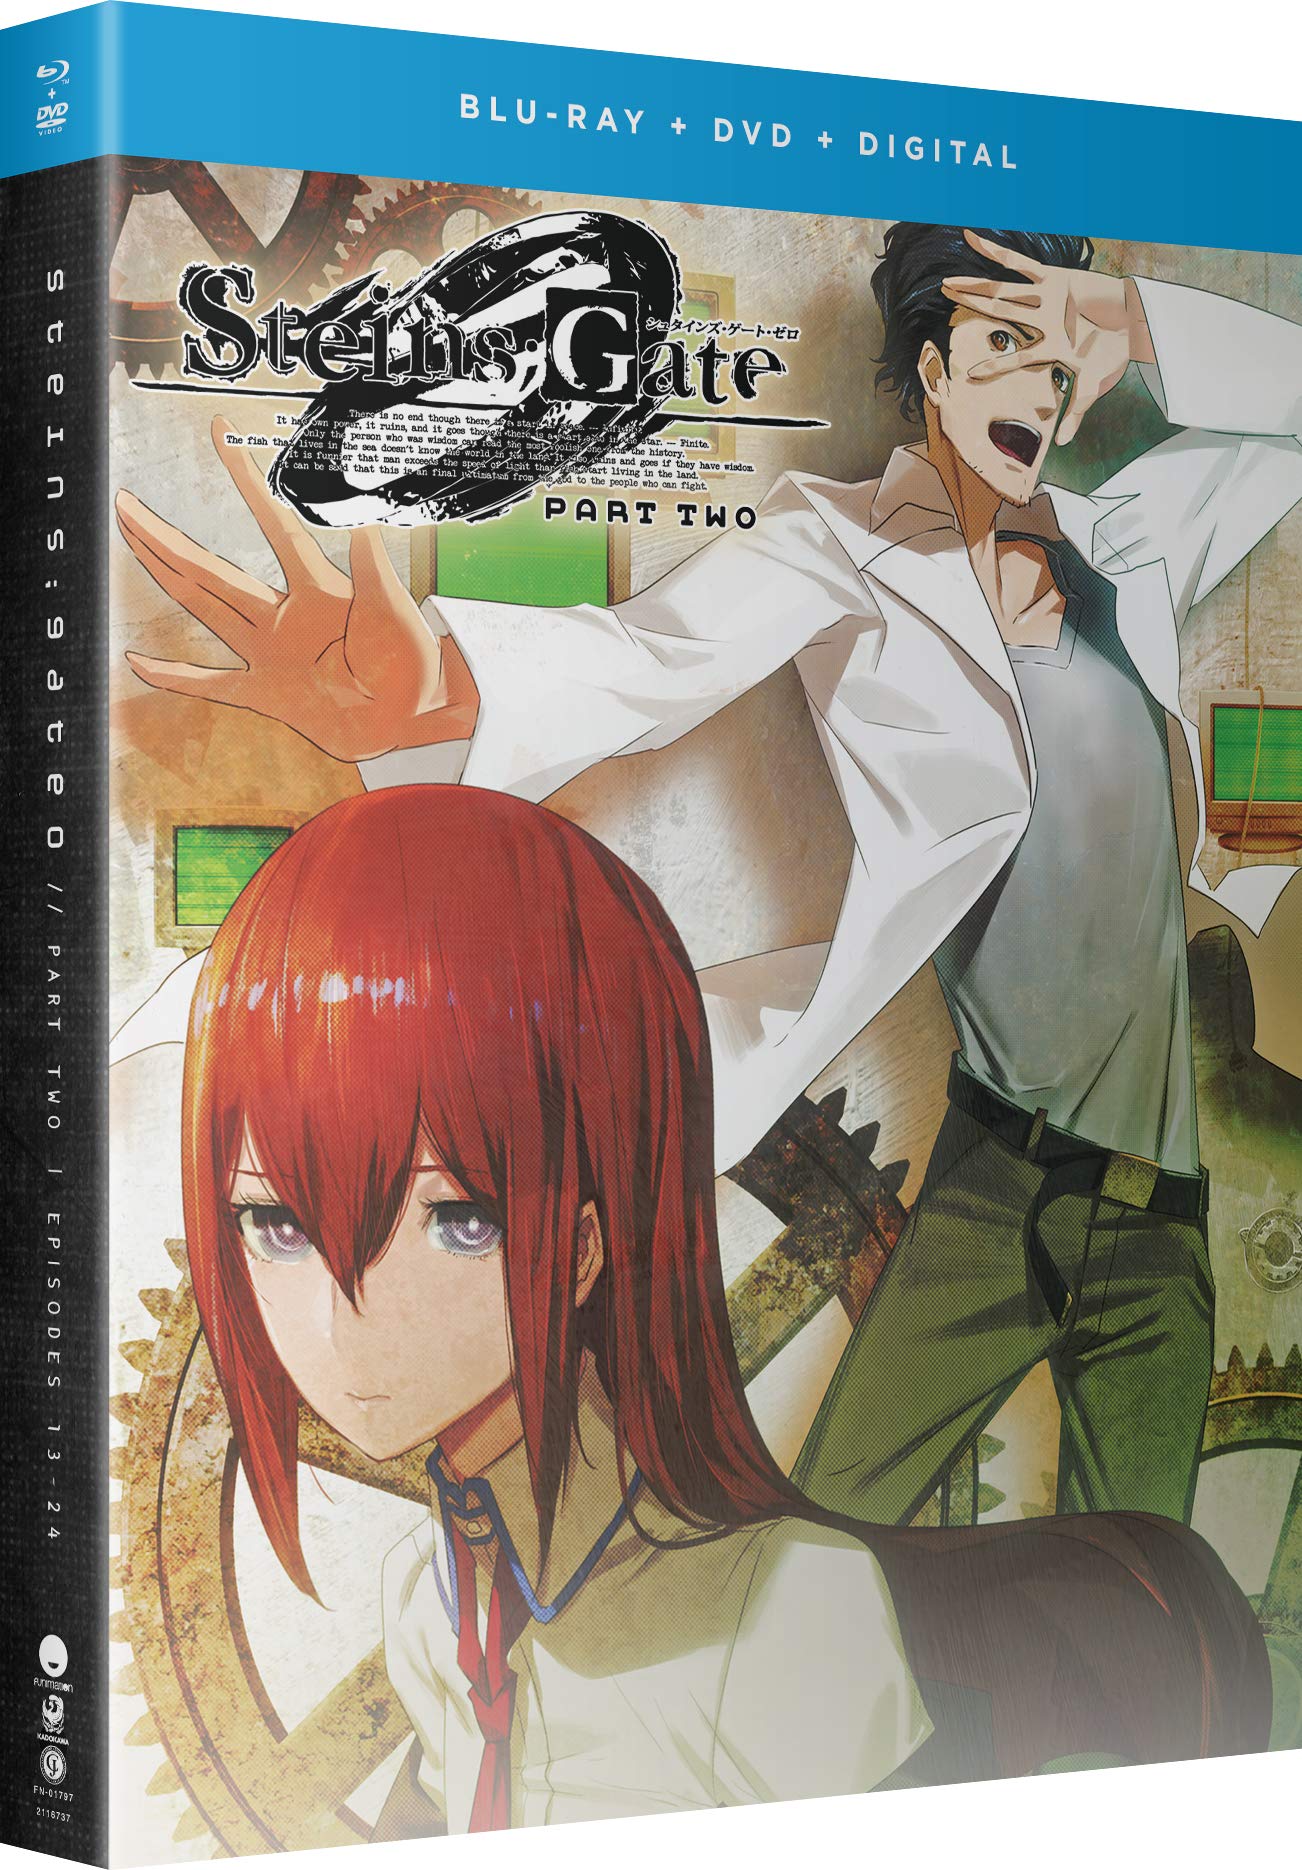 Steins/Gate 0 - Part Two [Blu-ray]